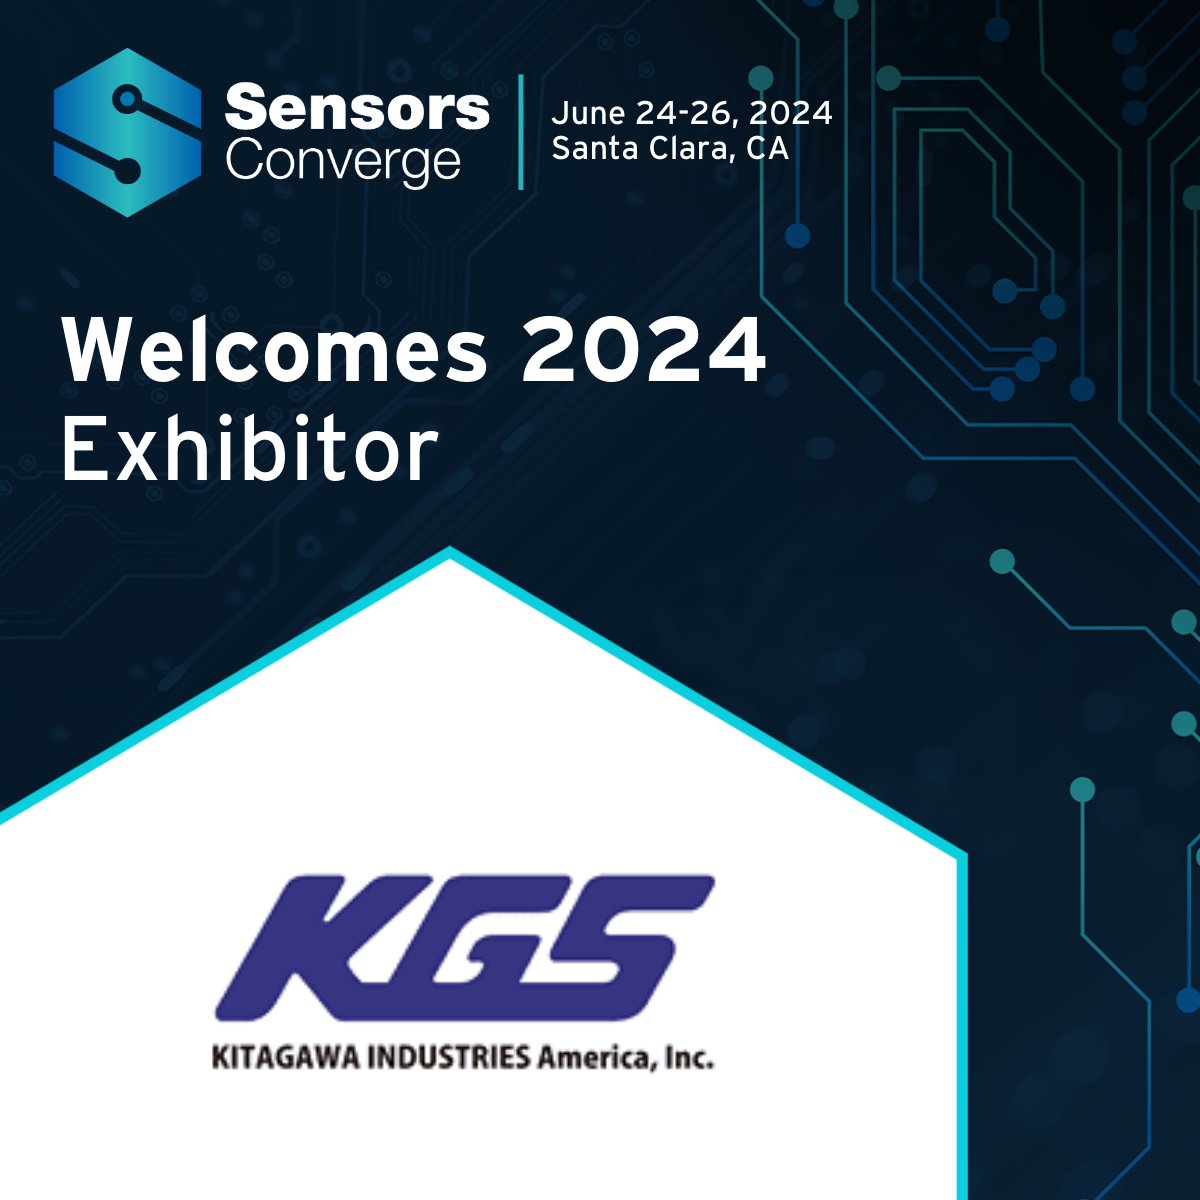 Welcome KGS America to #SensorsConverge KGS designs, tests, manufactures and sells unique solution materials to solve electrical, mechanical, and design engineering needs. Learn more: loom.ly/X1ajvVA Register: June 24-26 in Santa Clara! loom.ly/L1clL-A #sensors